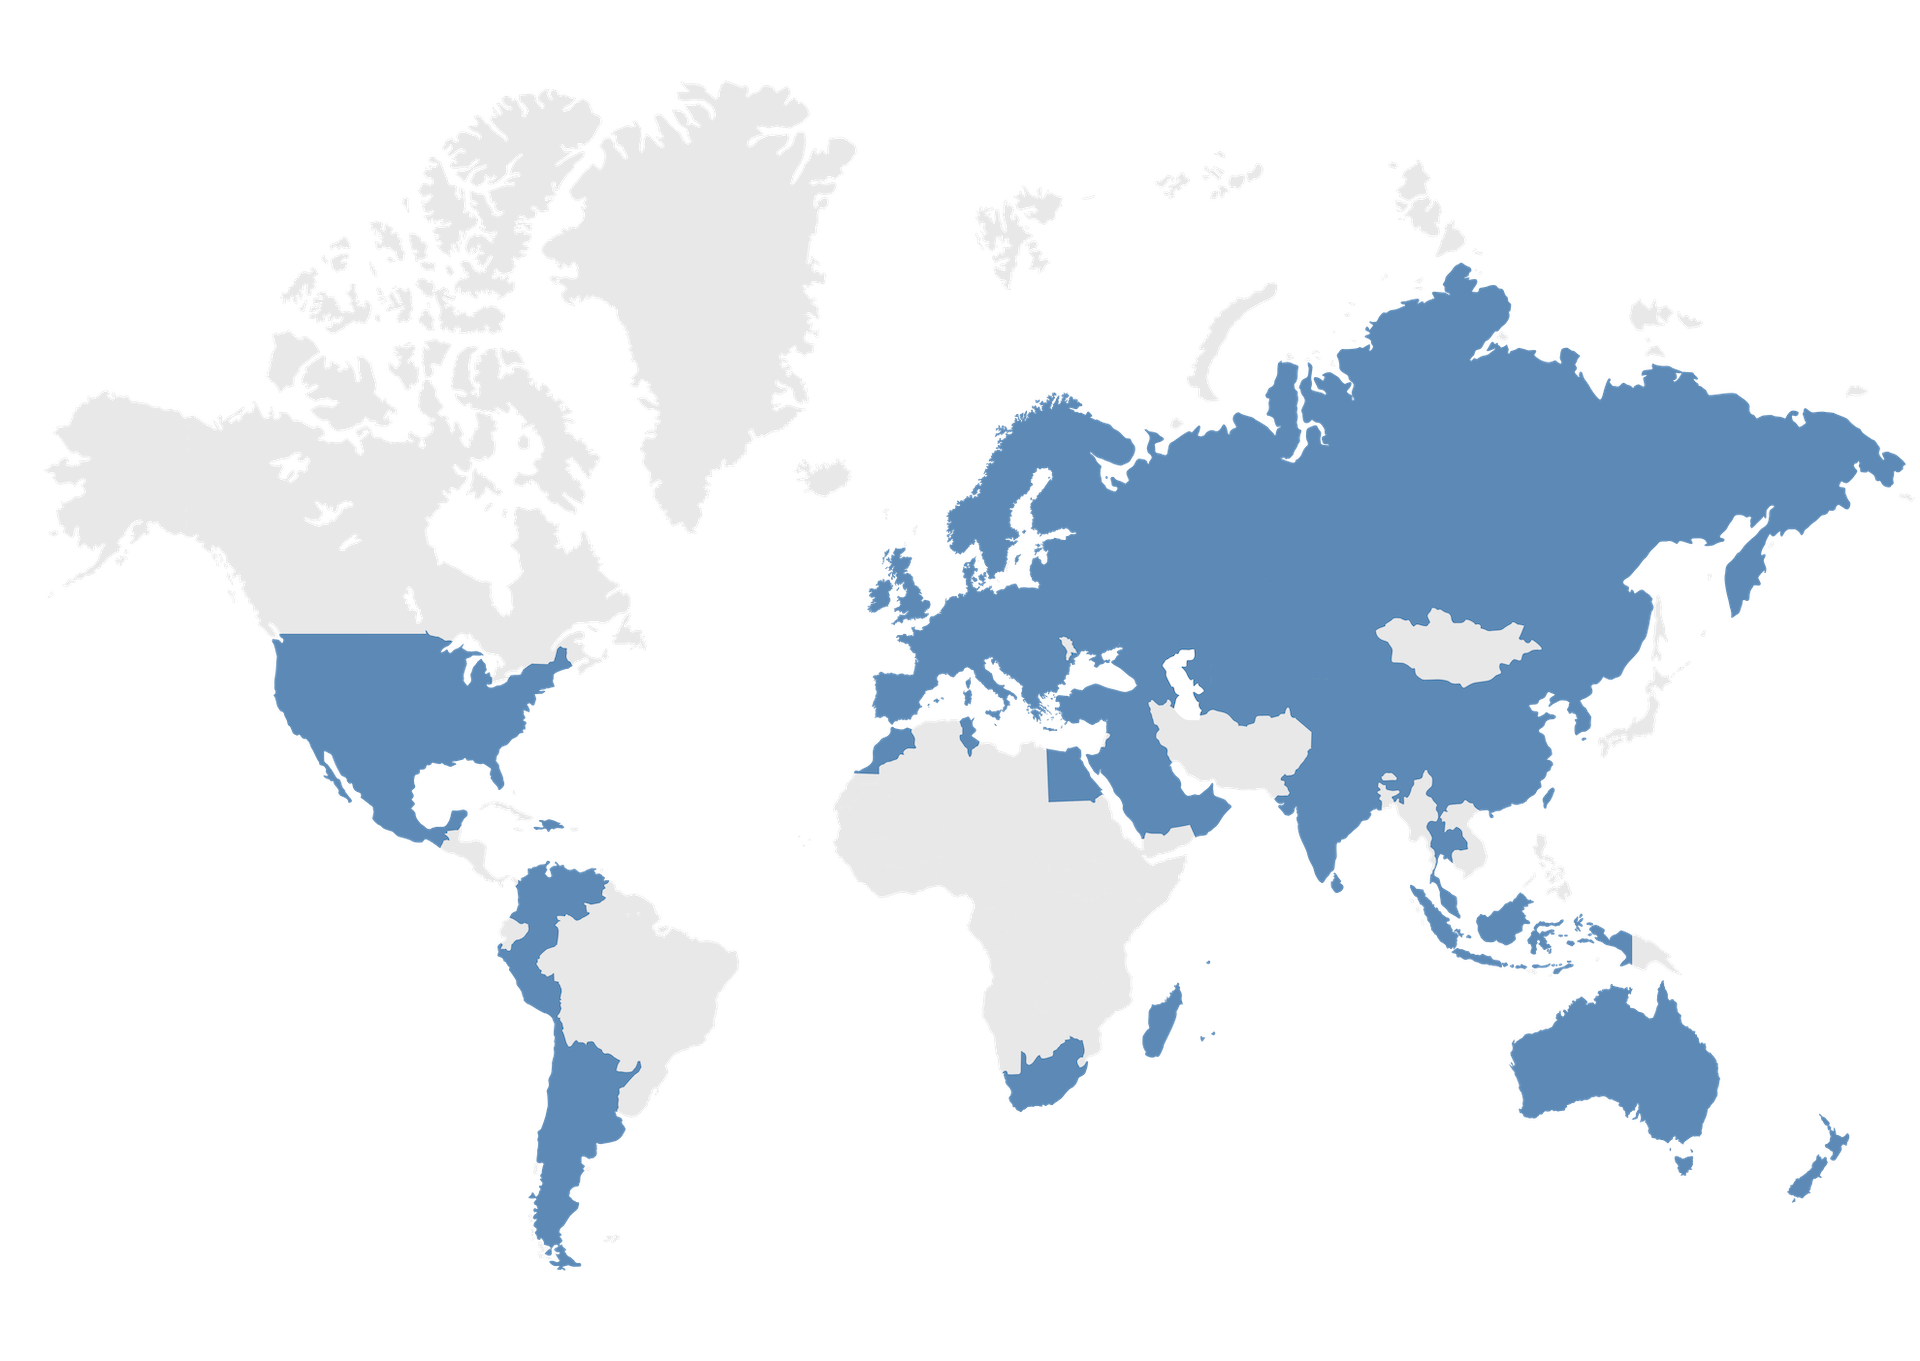 Icematic is present in 120 countries worldwide - Ice machines